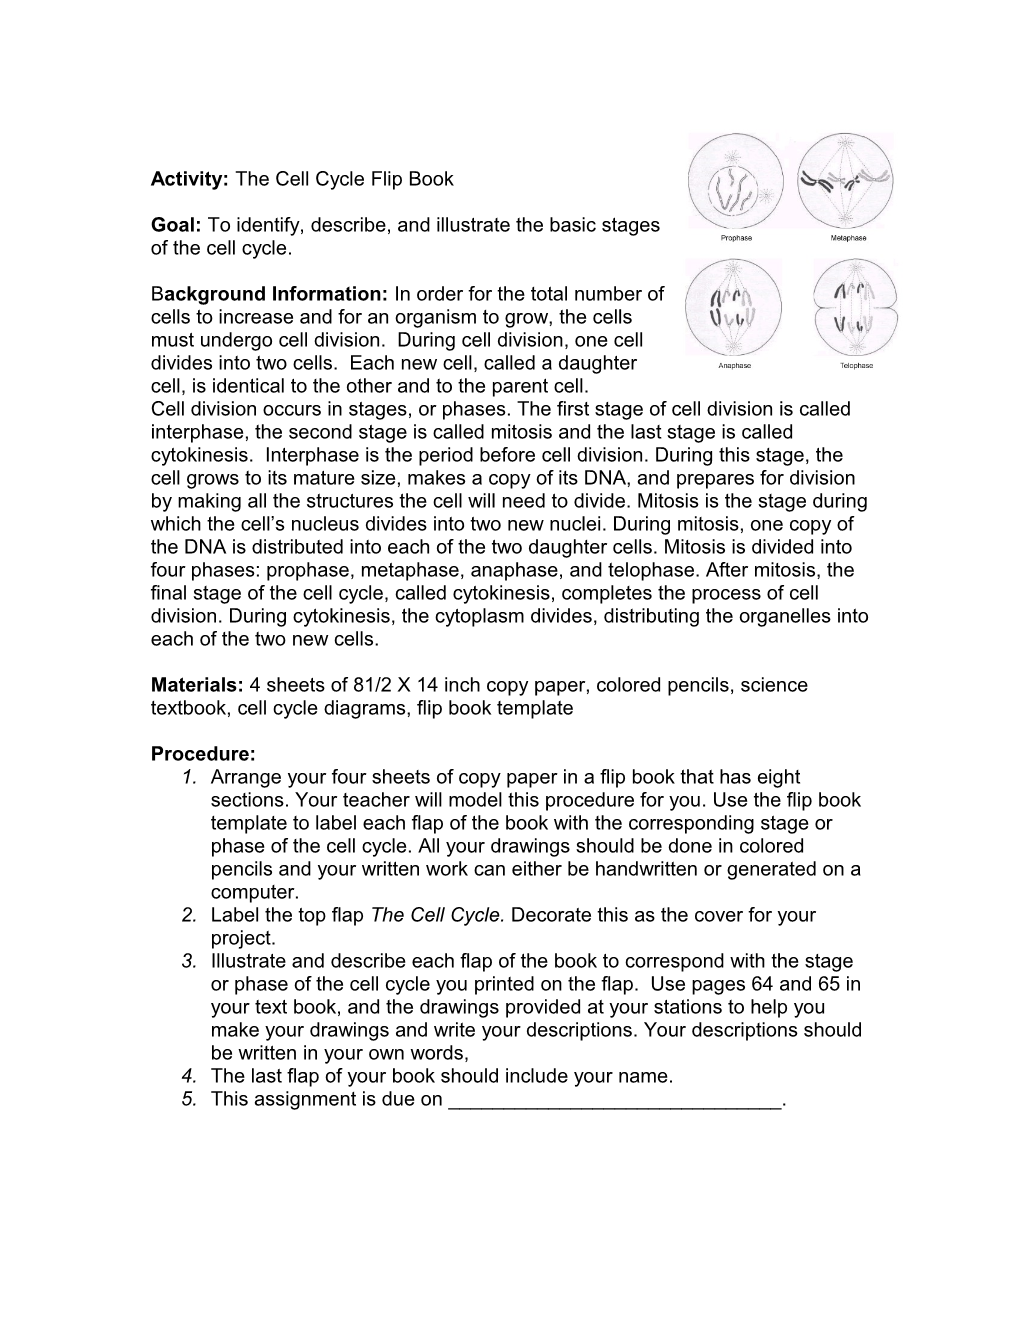 Activity: the Cell Cycle Flip Book